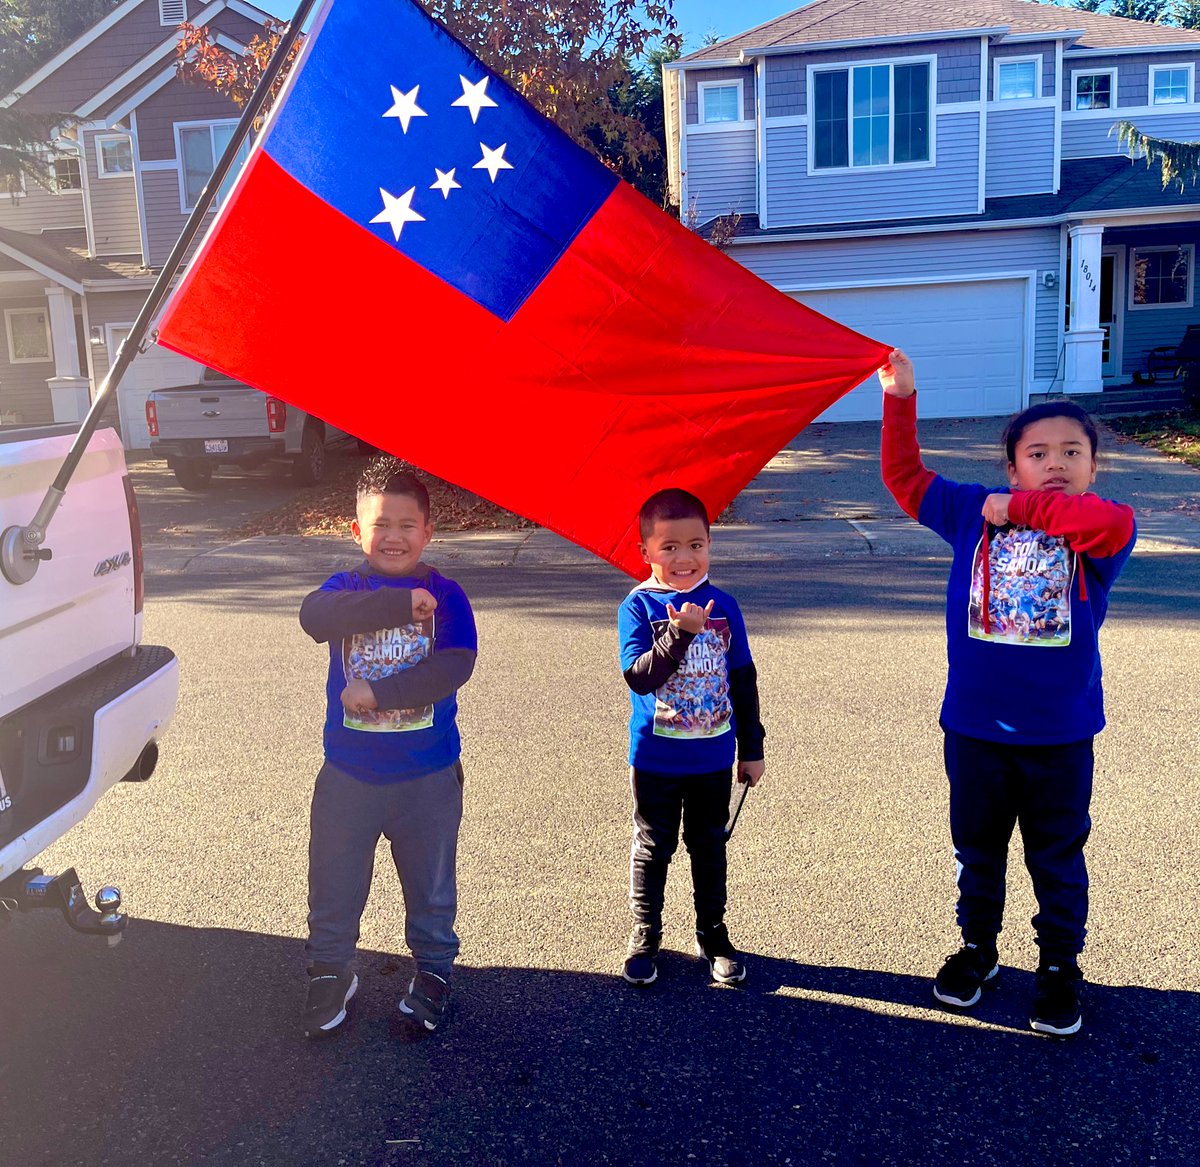 O AI LE TOA🇼🇸🇼🇸🇼🇸 my littles heading to the parade with their Uncle. Iron on transfers FTW for last minute shirts, lol. #ToaSamoa